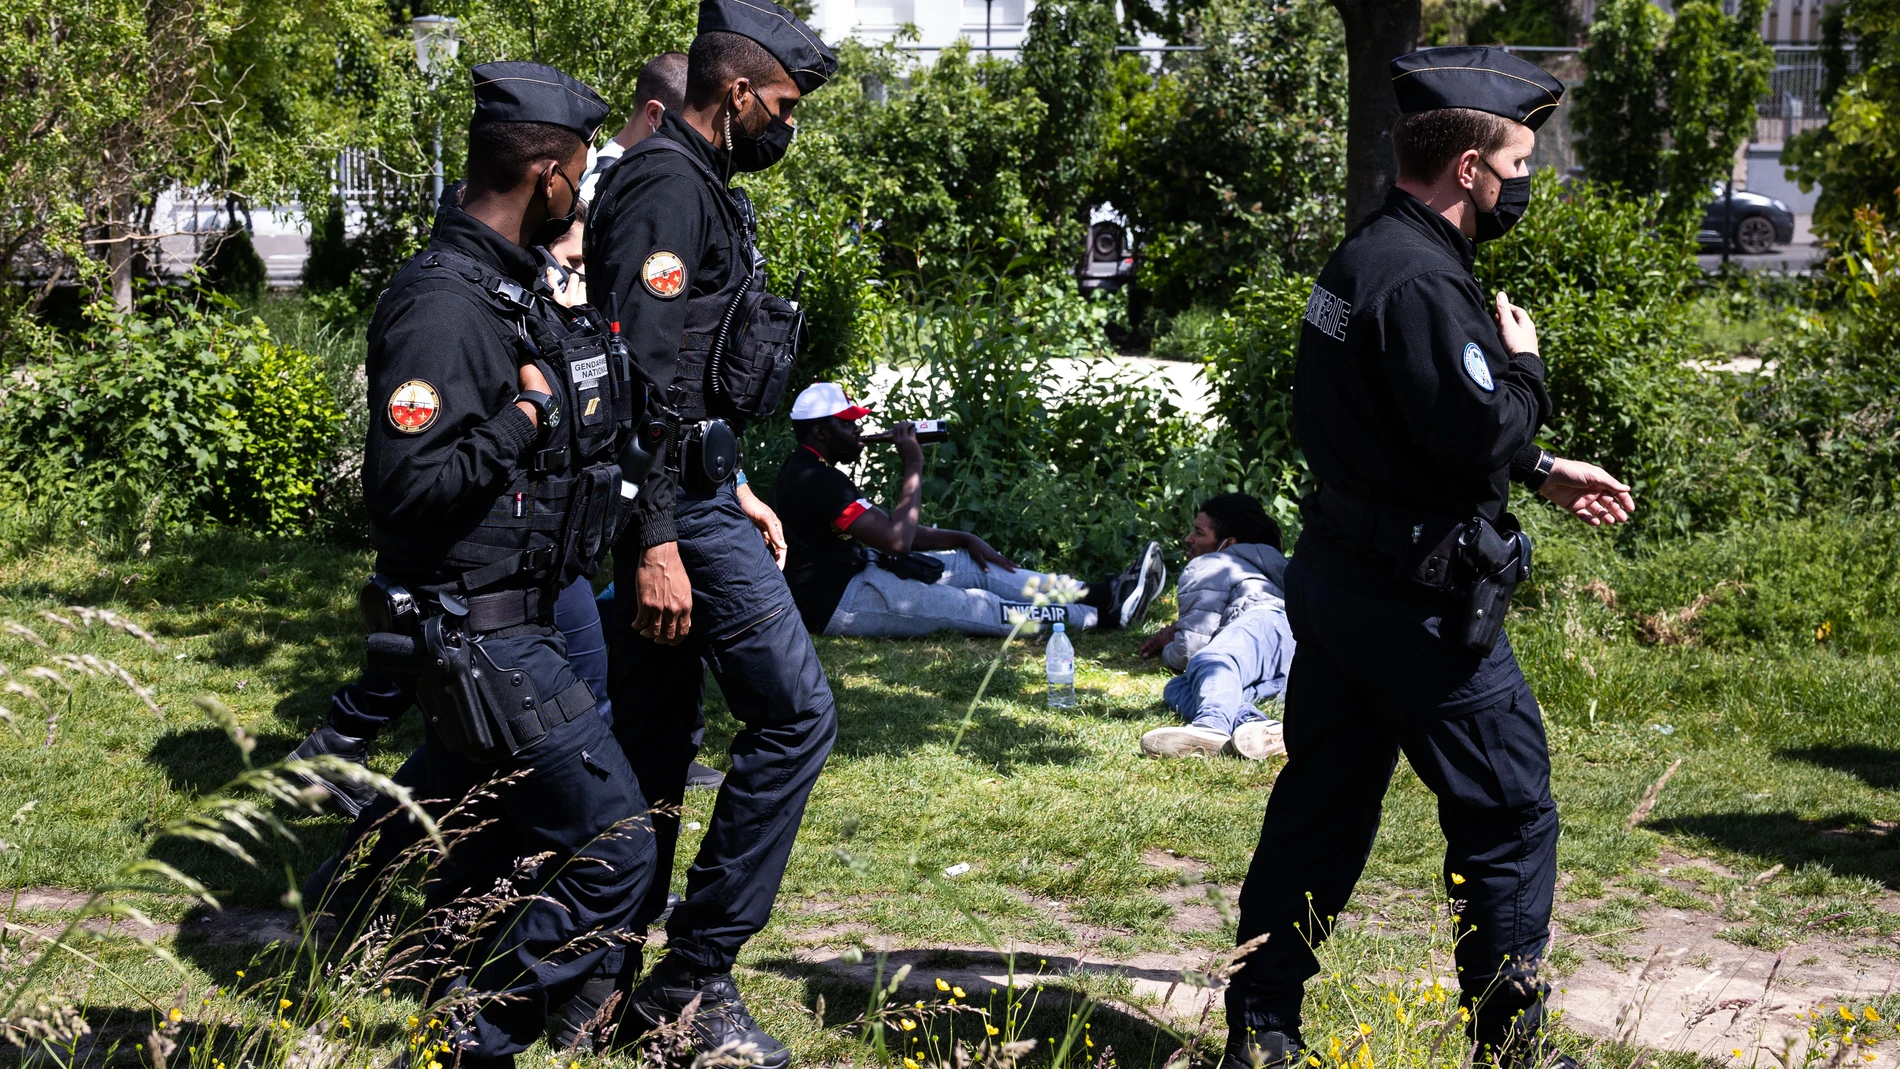 May 29, 2021, Paris, France, France: President of the Regional Council of Ile de France and Paris' 7th district mayor visit the Jardin d Eole (Eole Garden), eastern Paris, to discuss the situation of drug addicted persons staying in the area. (Foto de ARCHIVO) 29/05/2021